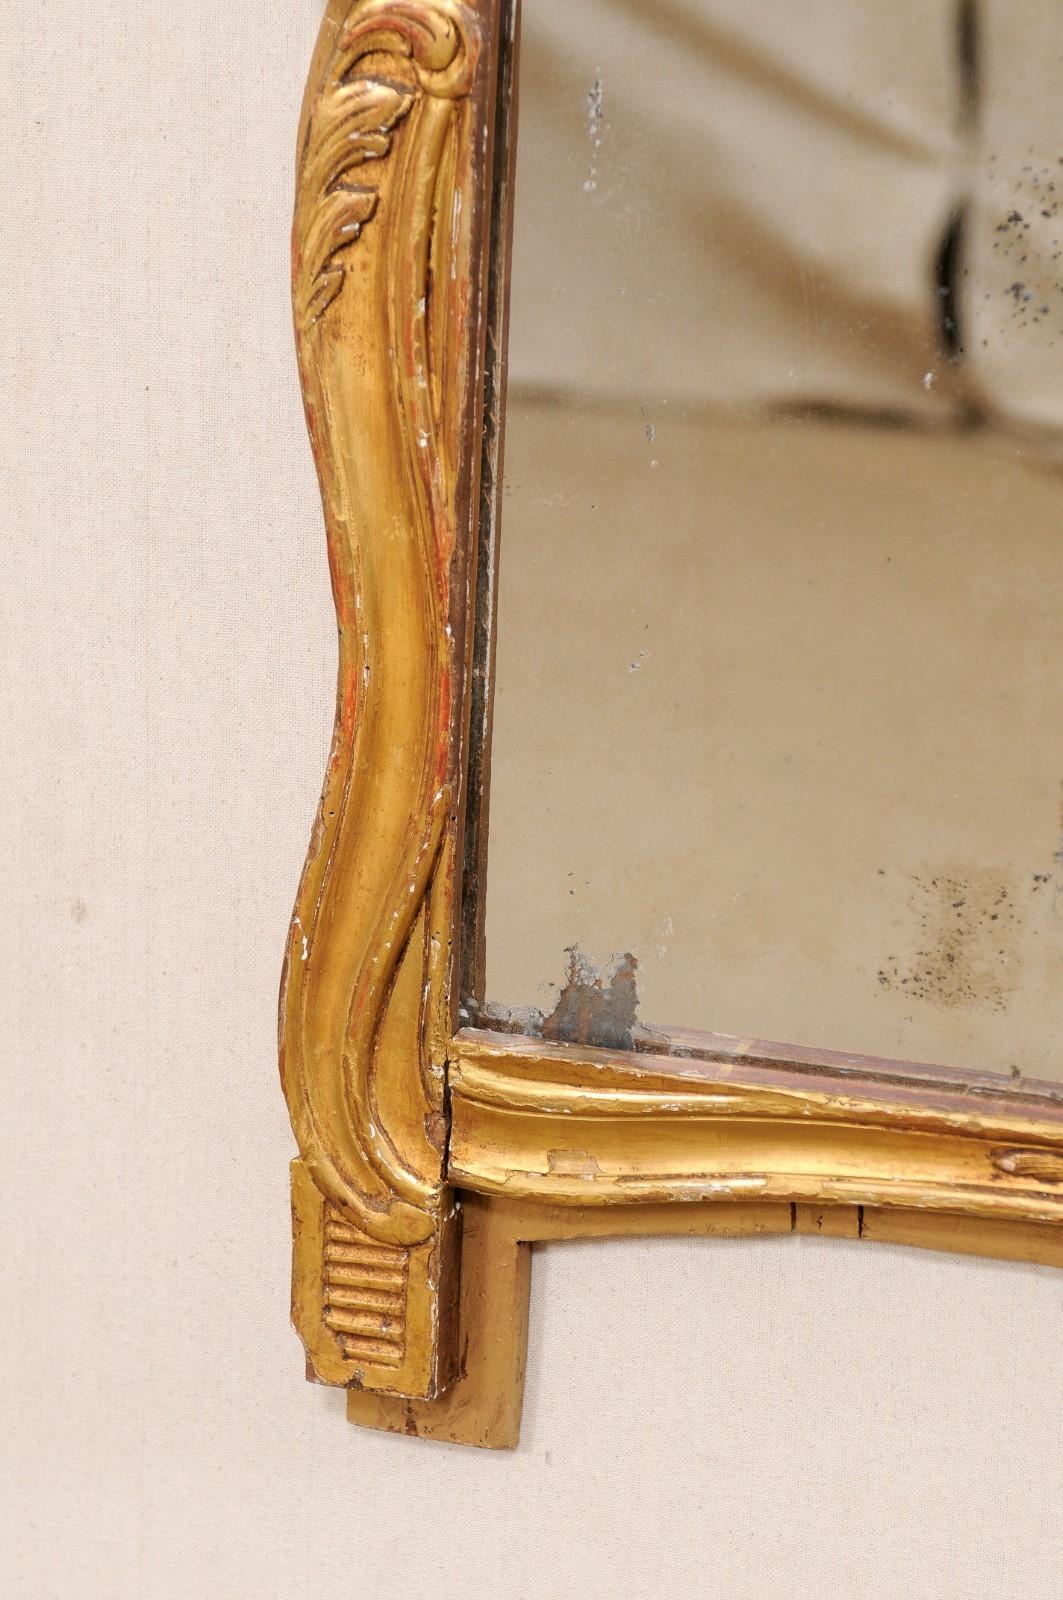 French Pair of 19th C. Mirrors w/ Their Original Gilt Finish For Sale 7